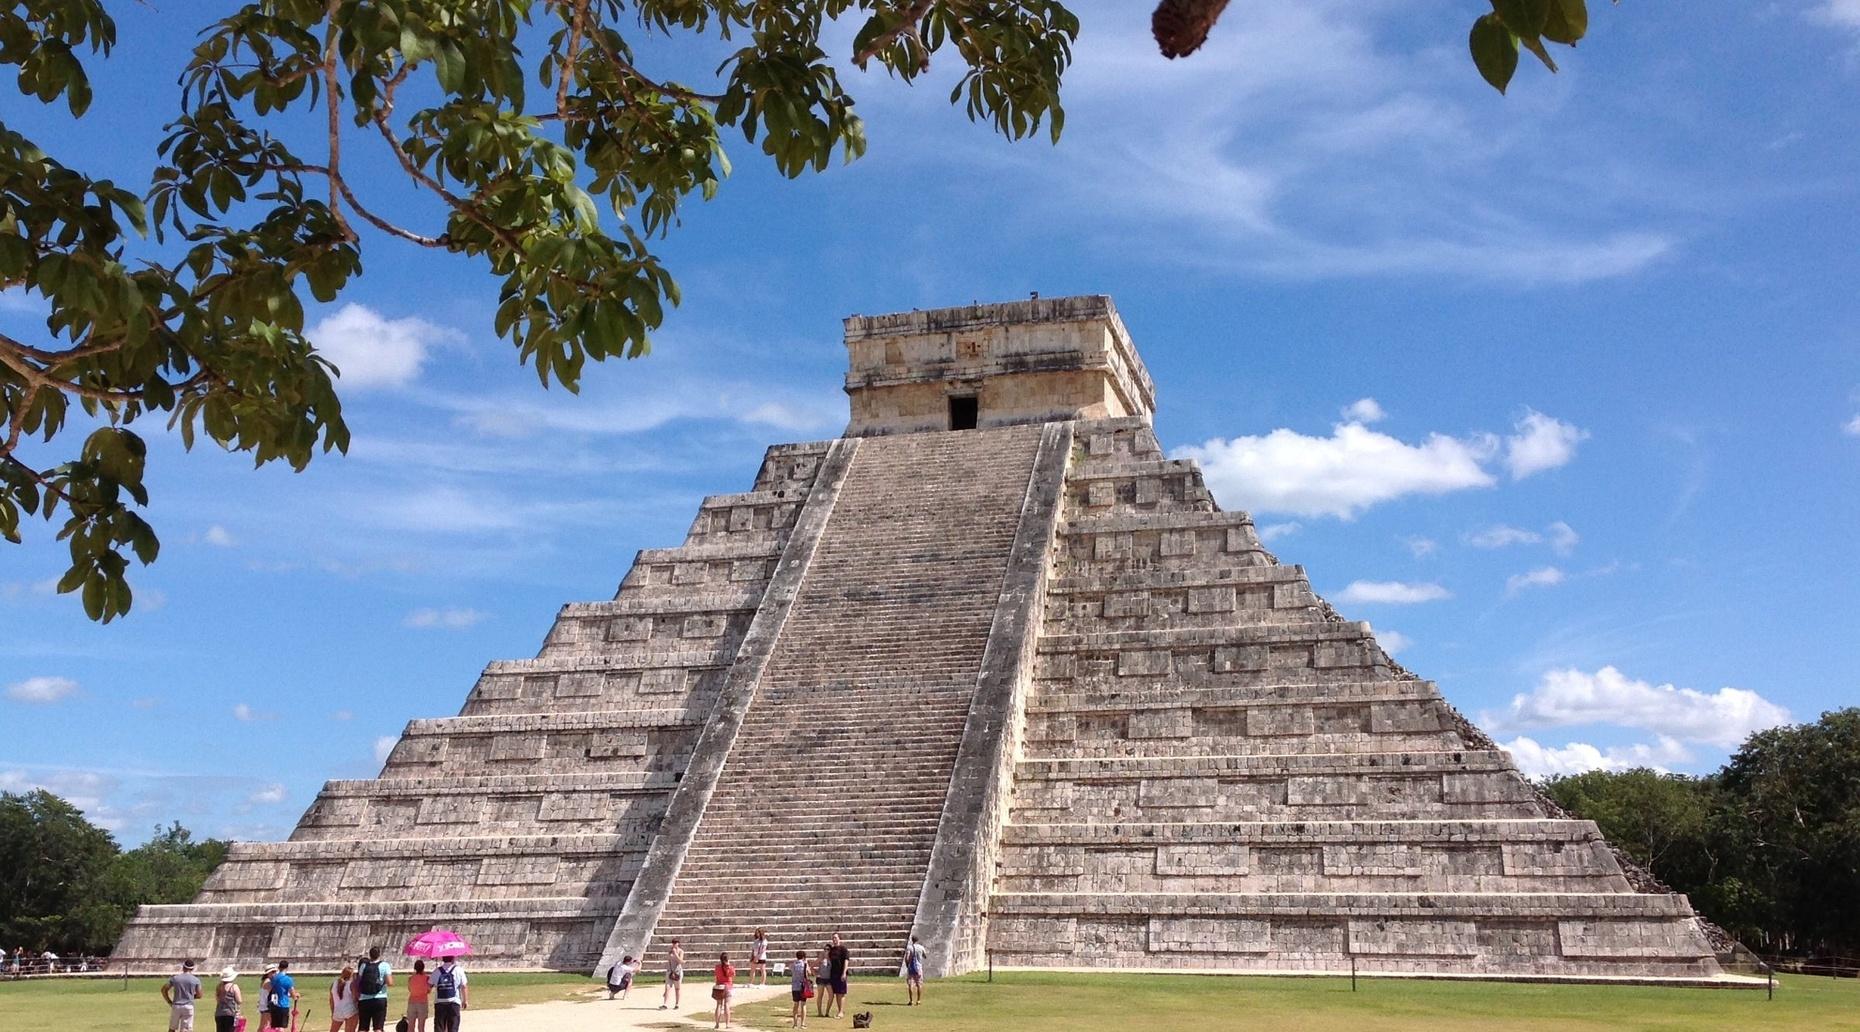 Guided Tour of Chichen Itza, Valladolid, Ik Kil Cenote with lunch